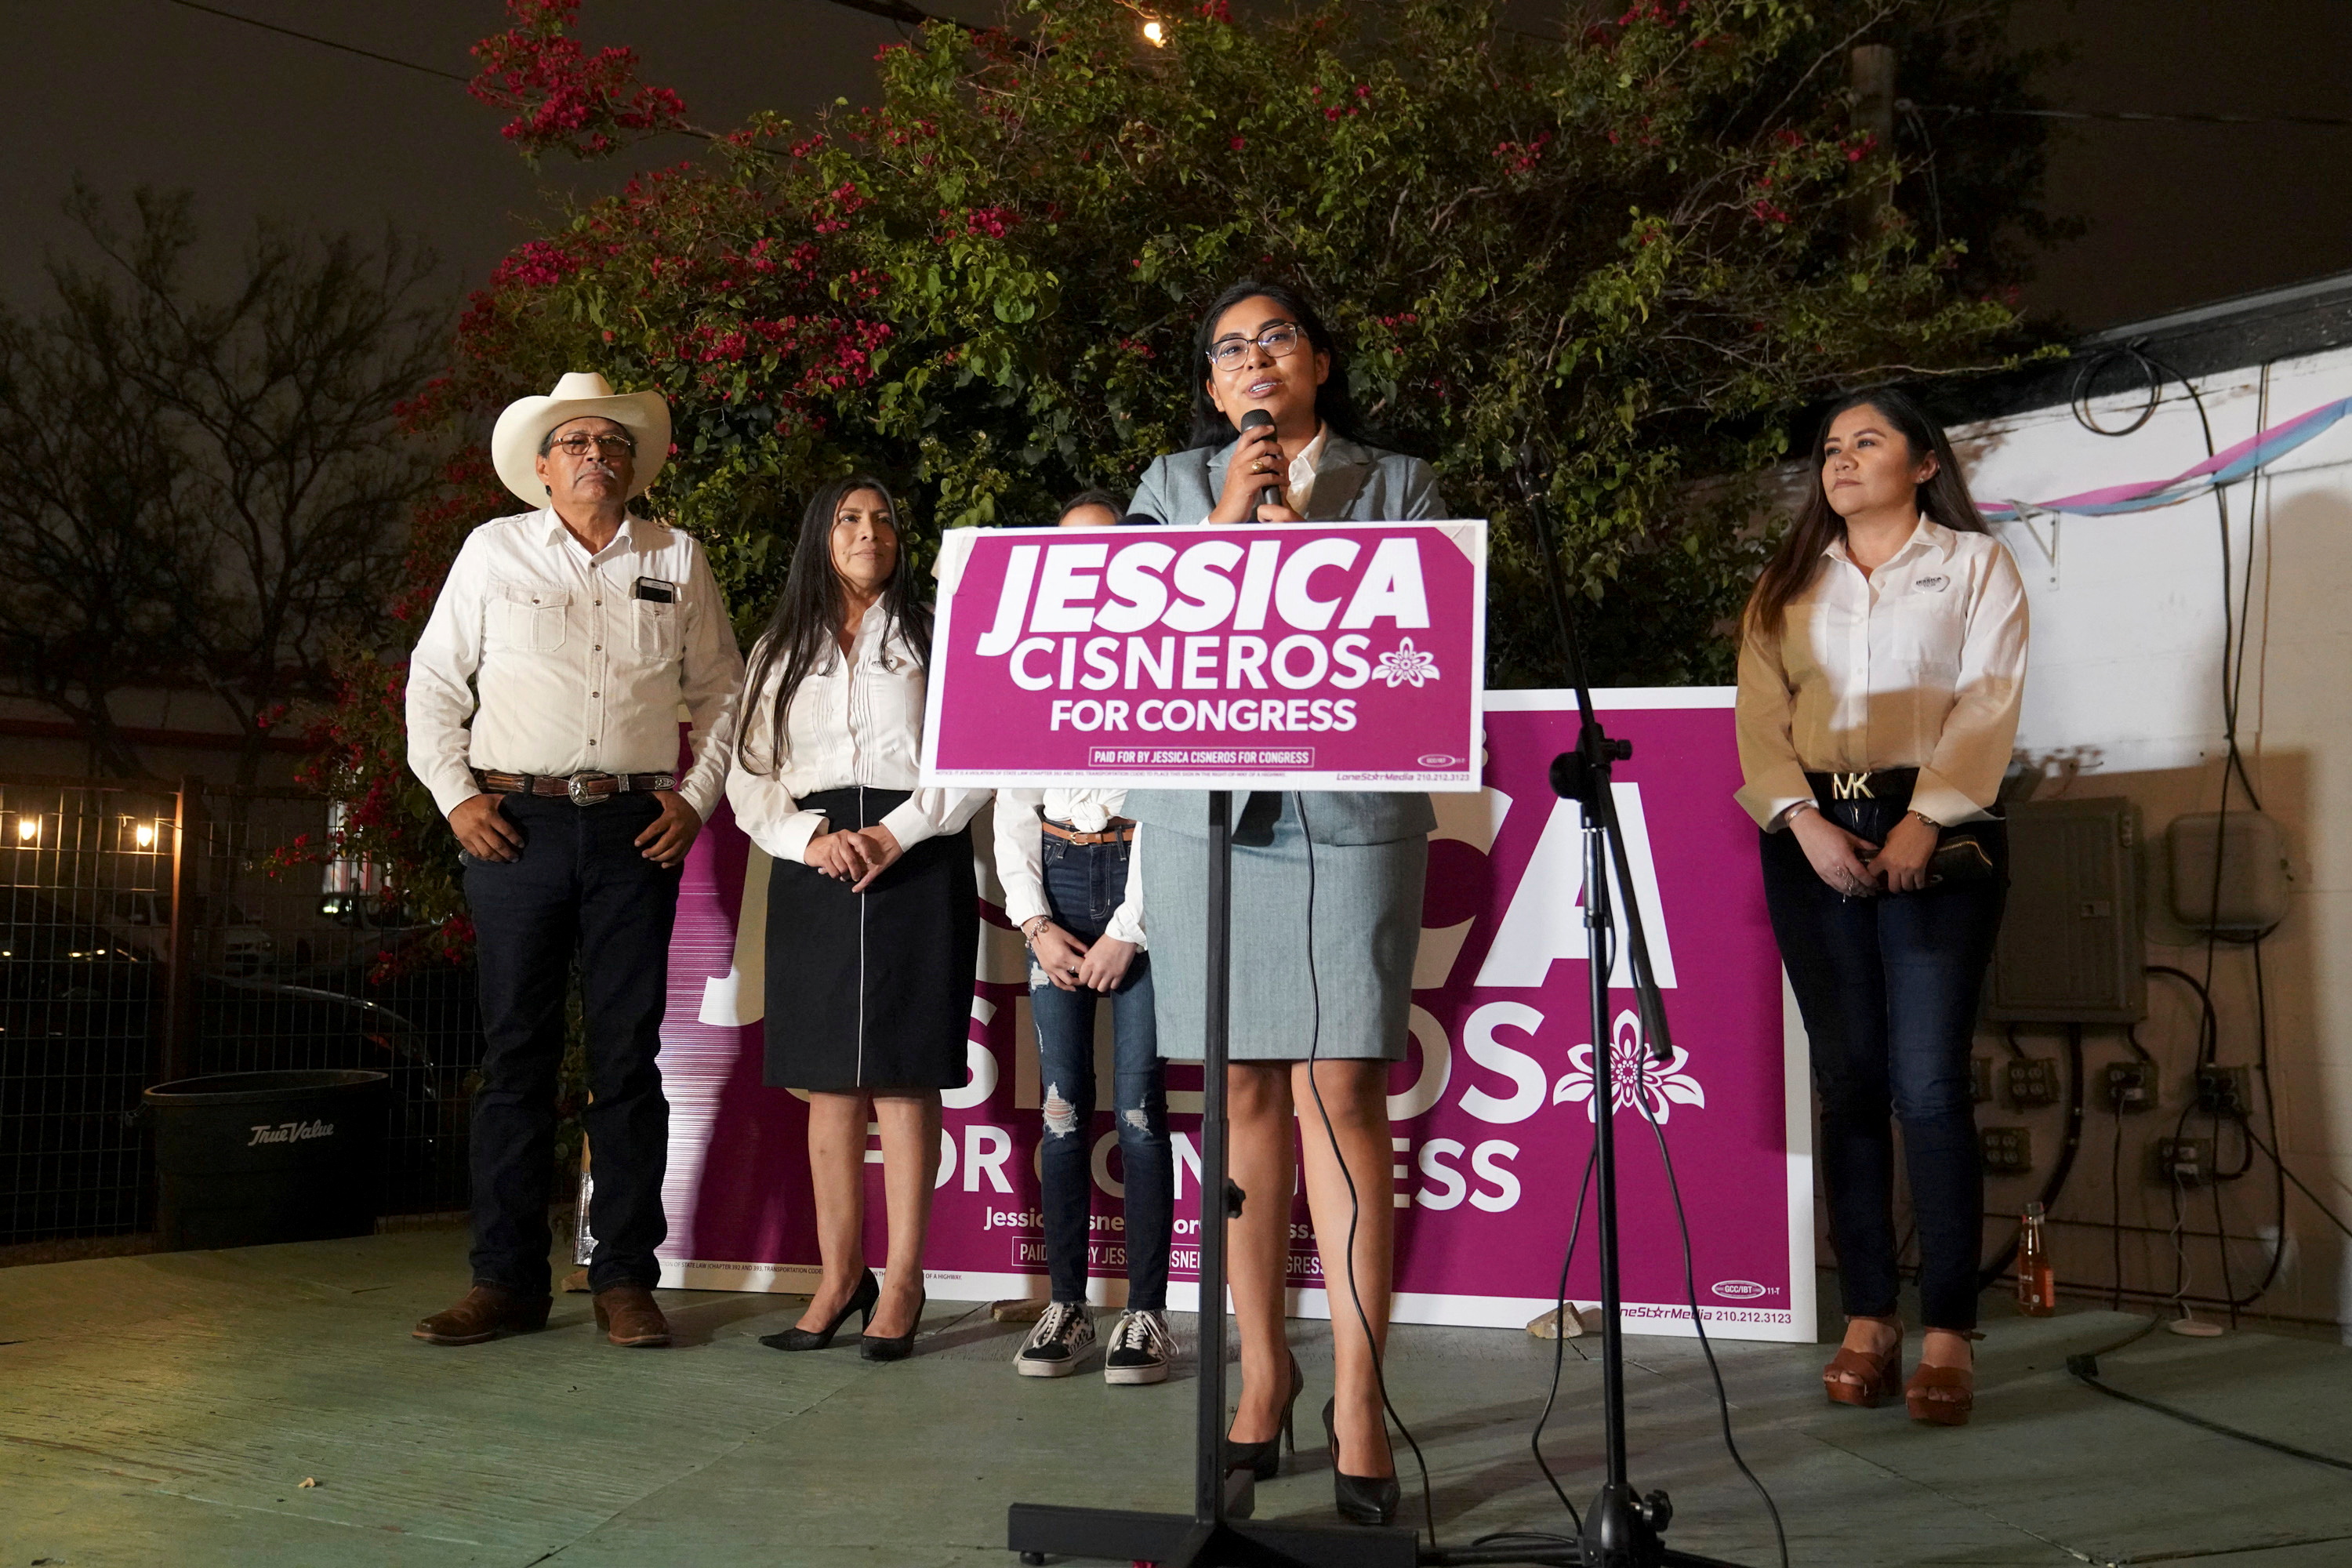 Democrat Jessica Cisneros campaigns for a House seat speaks during her watch party